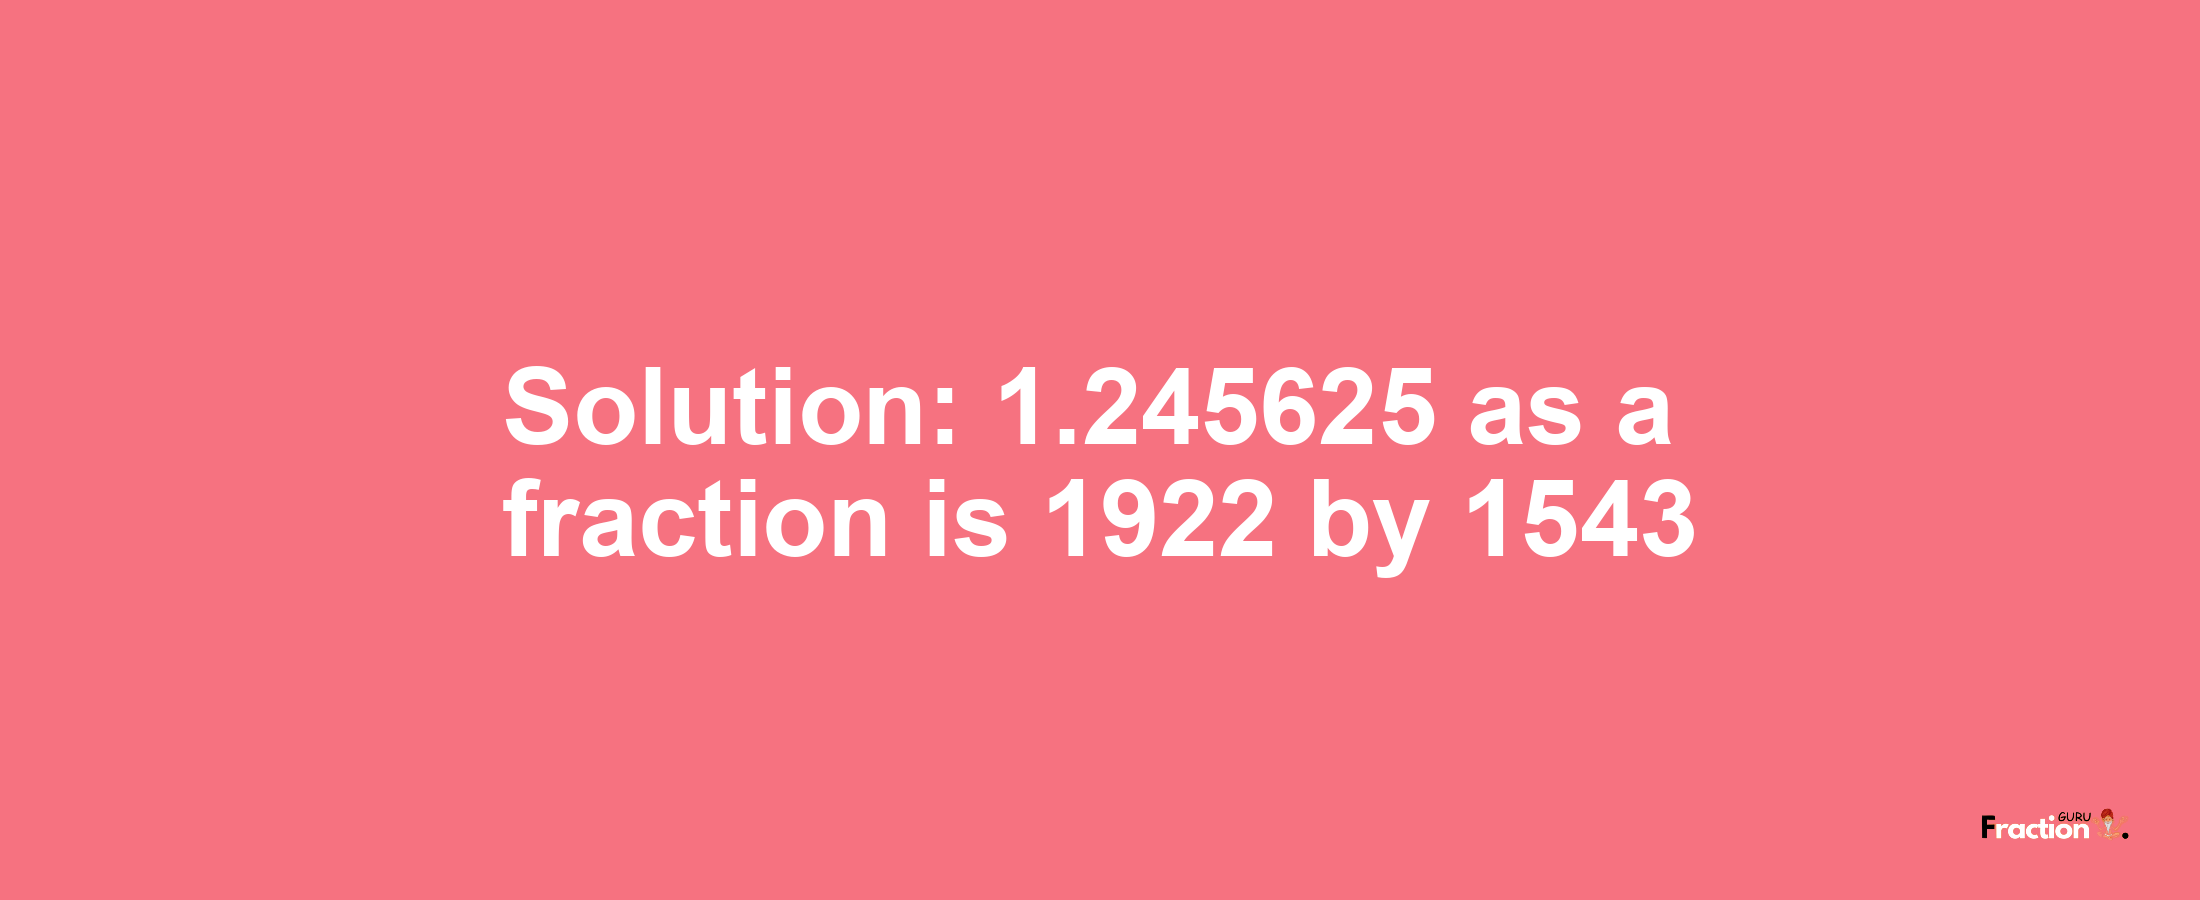 Solution:1.245625 as a fraction is 1922/1543